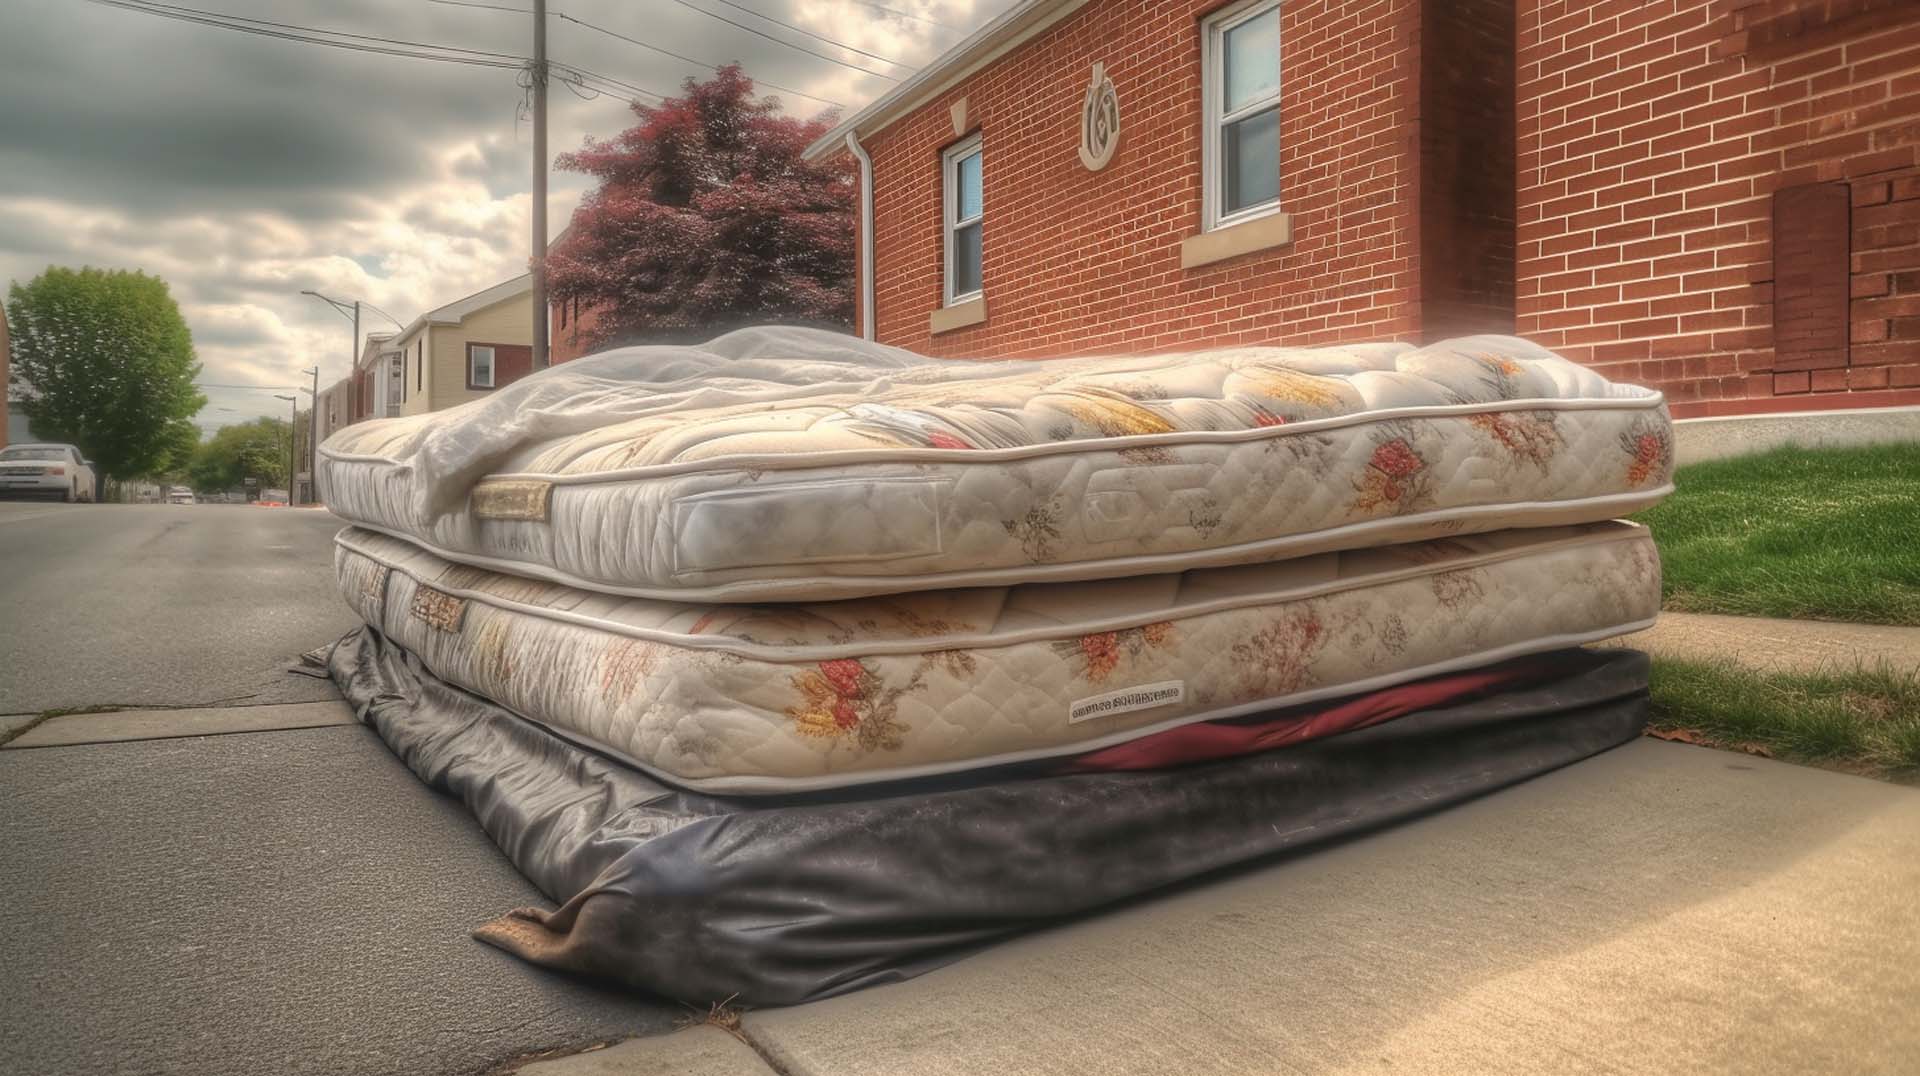 You can make sure your mattress removal is done properly by hiring a professional service in Whitehorse